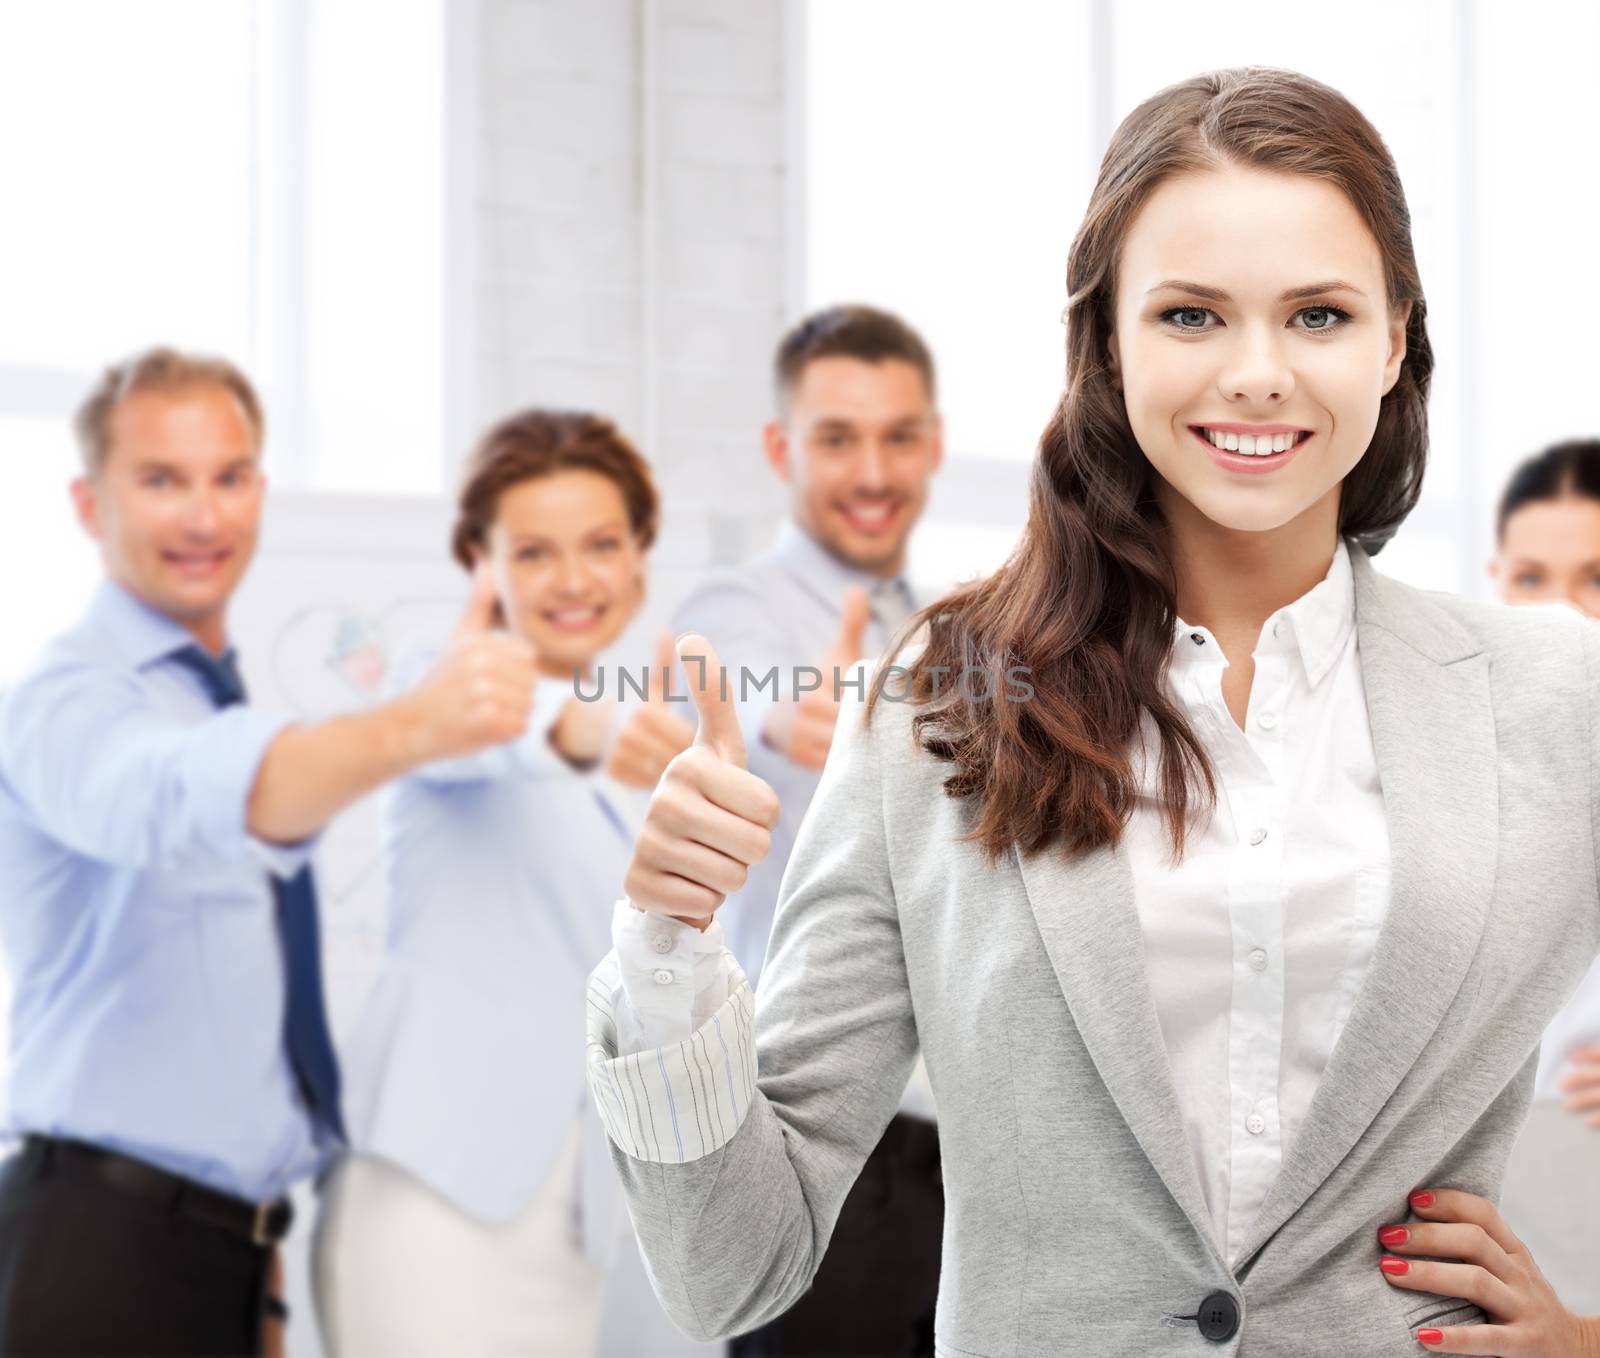 business and success - happy businesswoman showing thumbs up in office